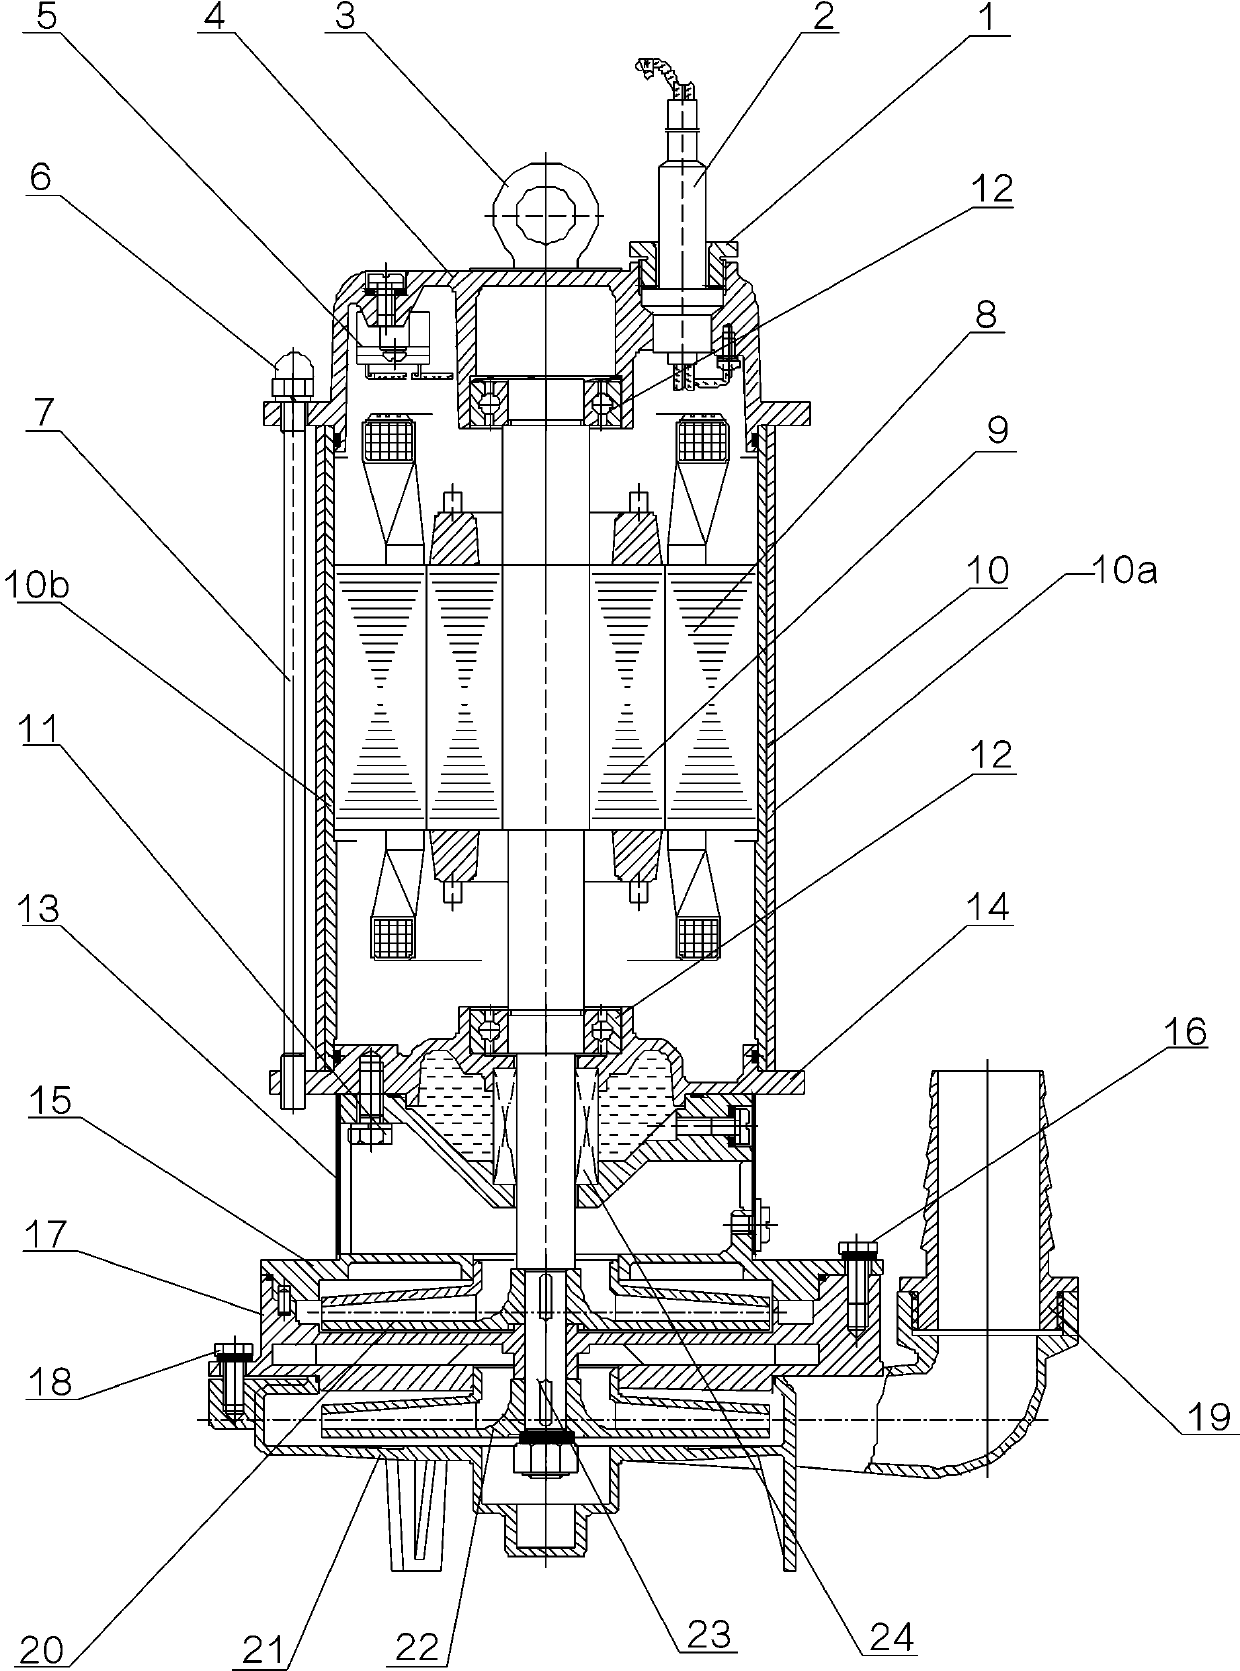 Submersible multistage electric pump